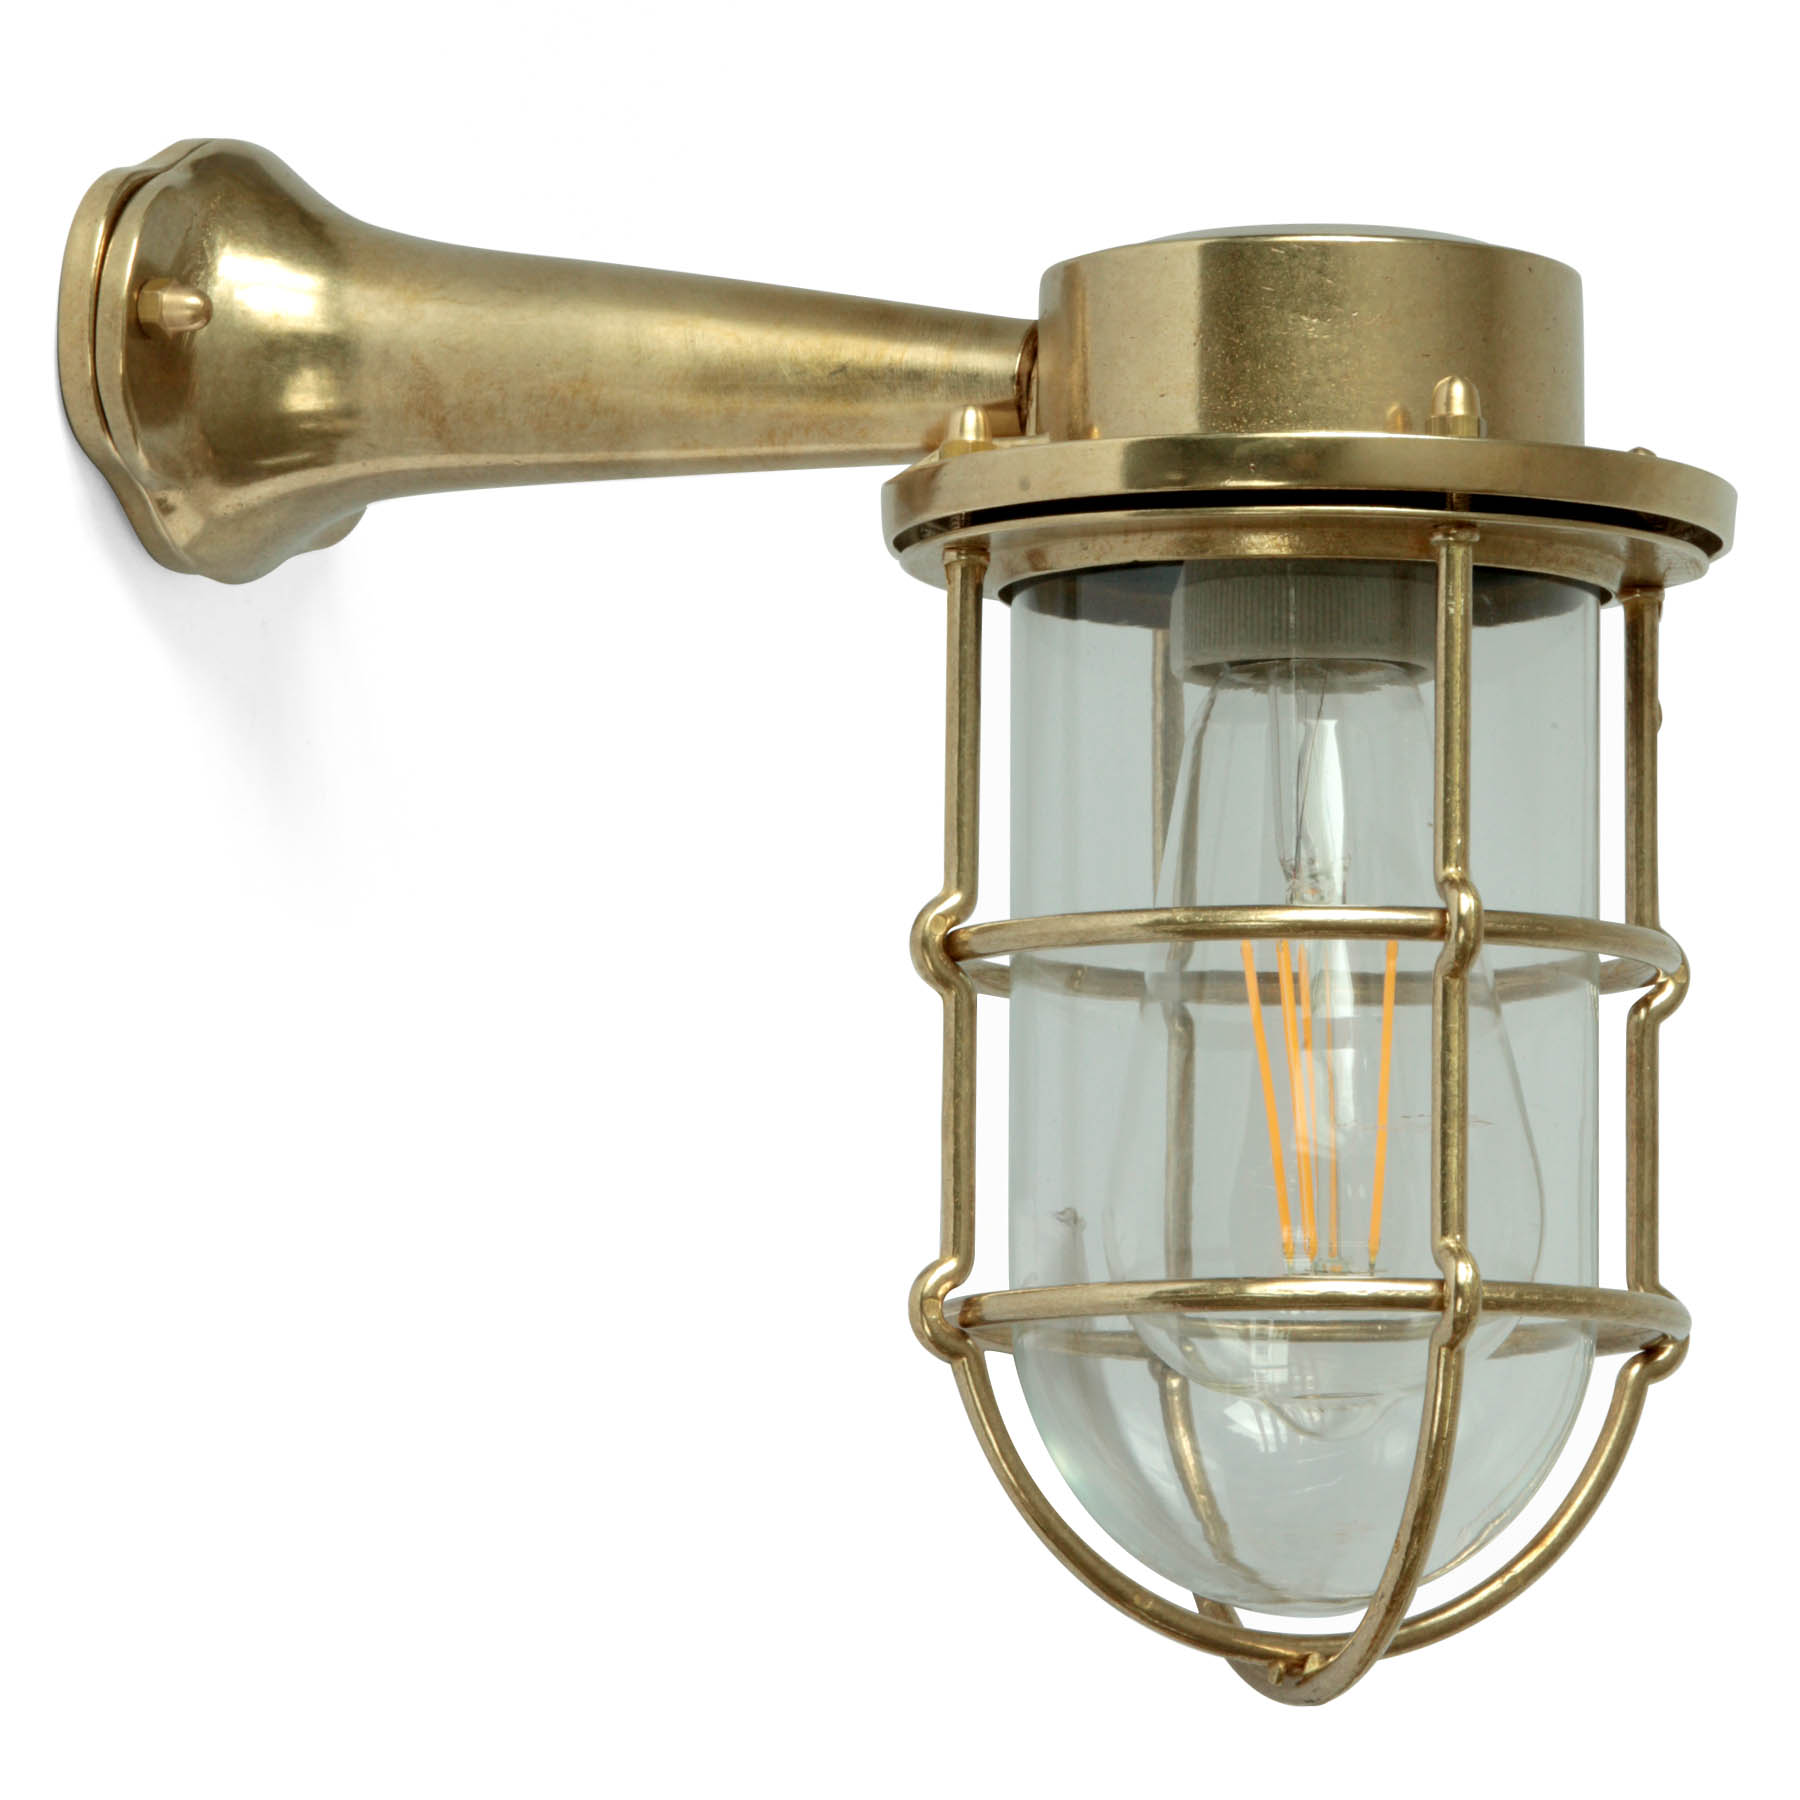 Grid-protected maritime wall light N° 716 with bracket